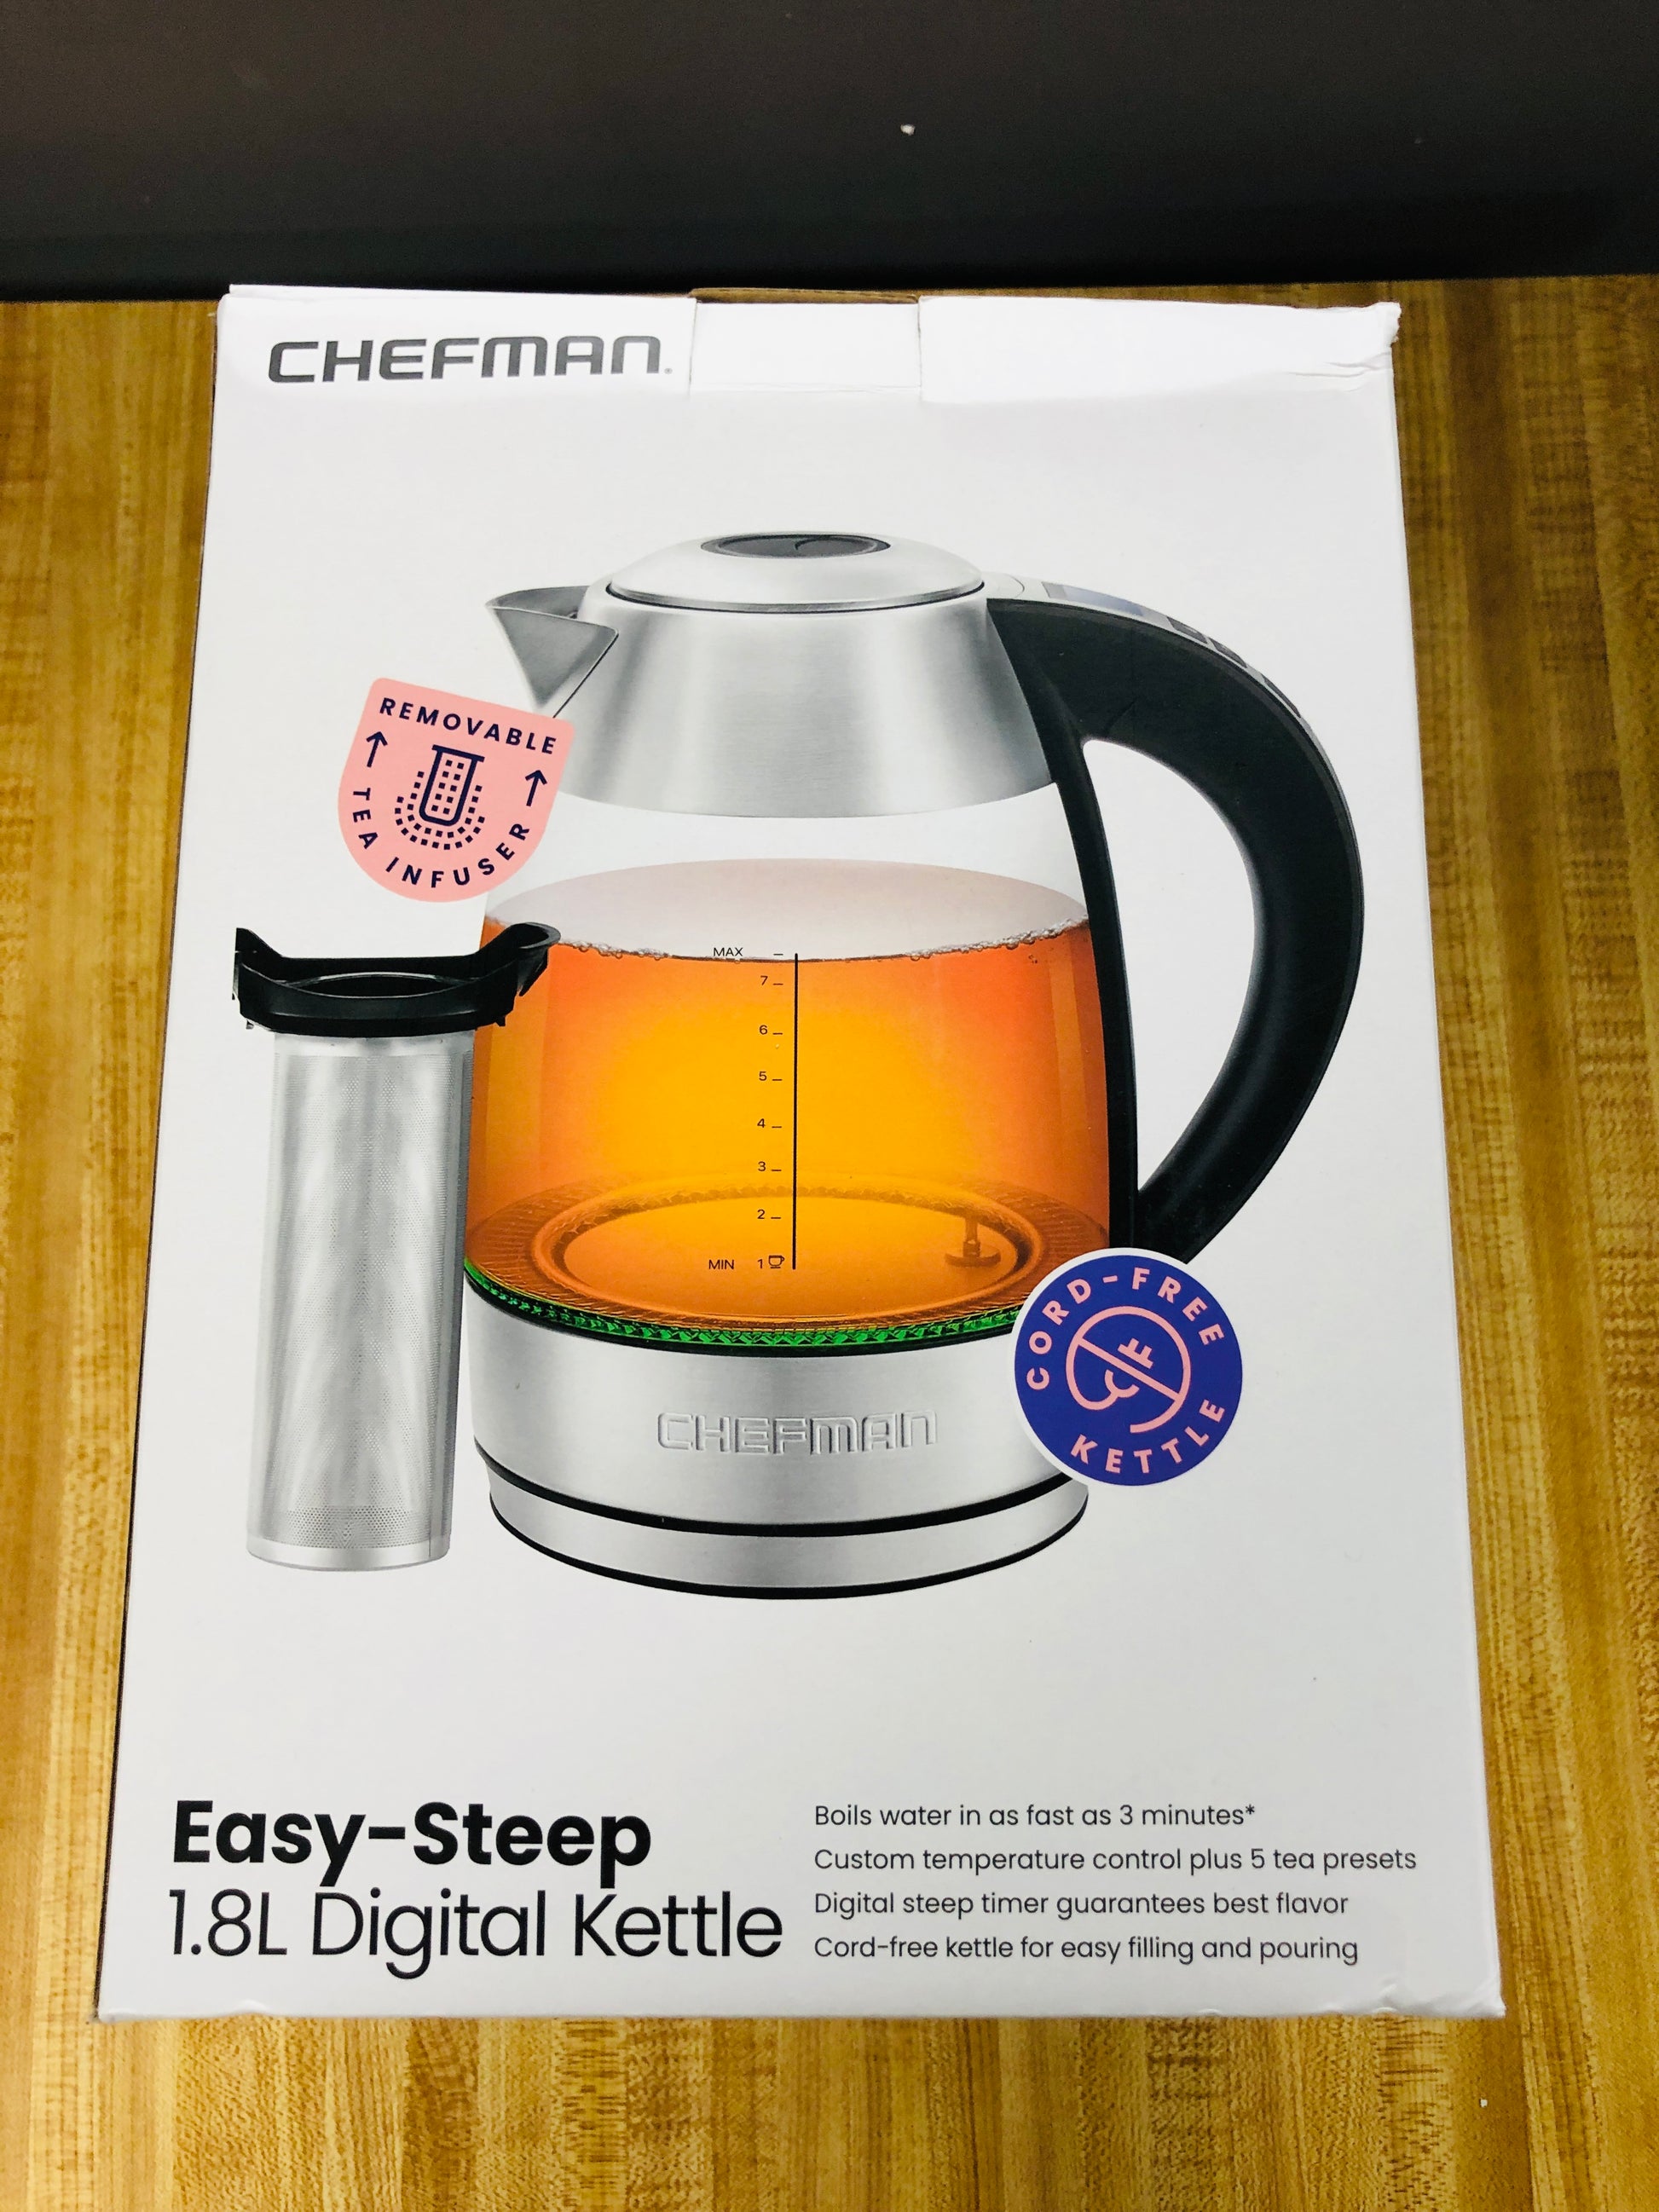 Chefman 1.8L Glass Electric Kettle with Tea Infuser - Silver